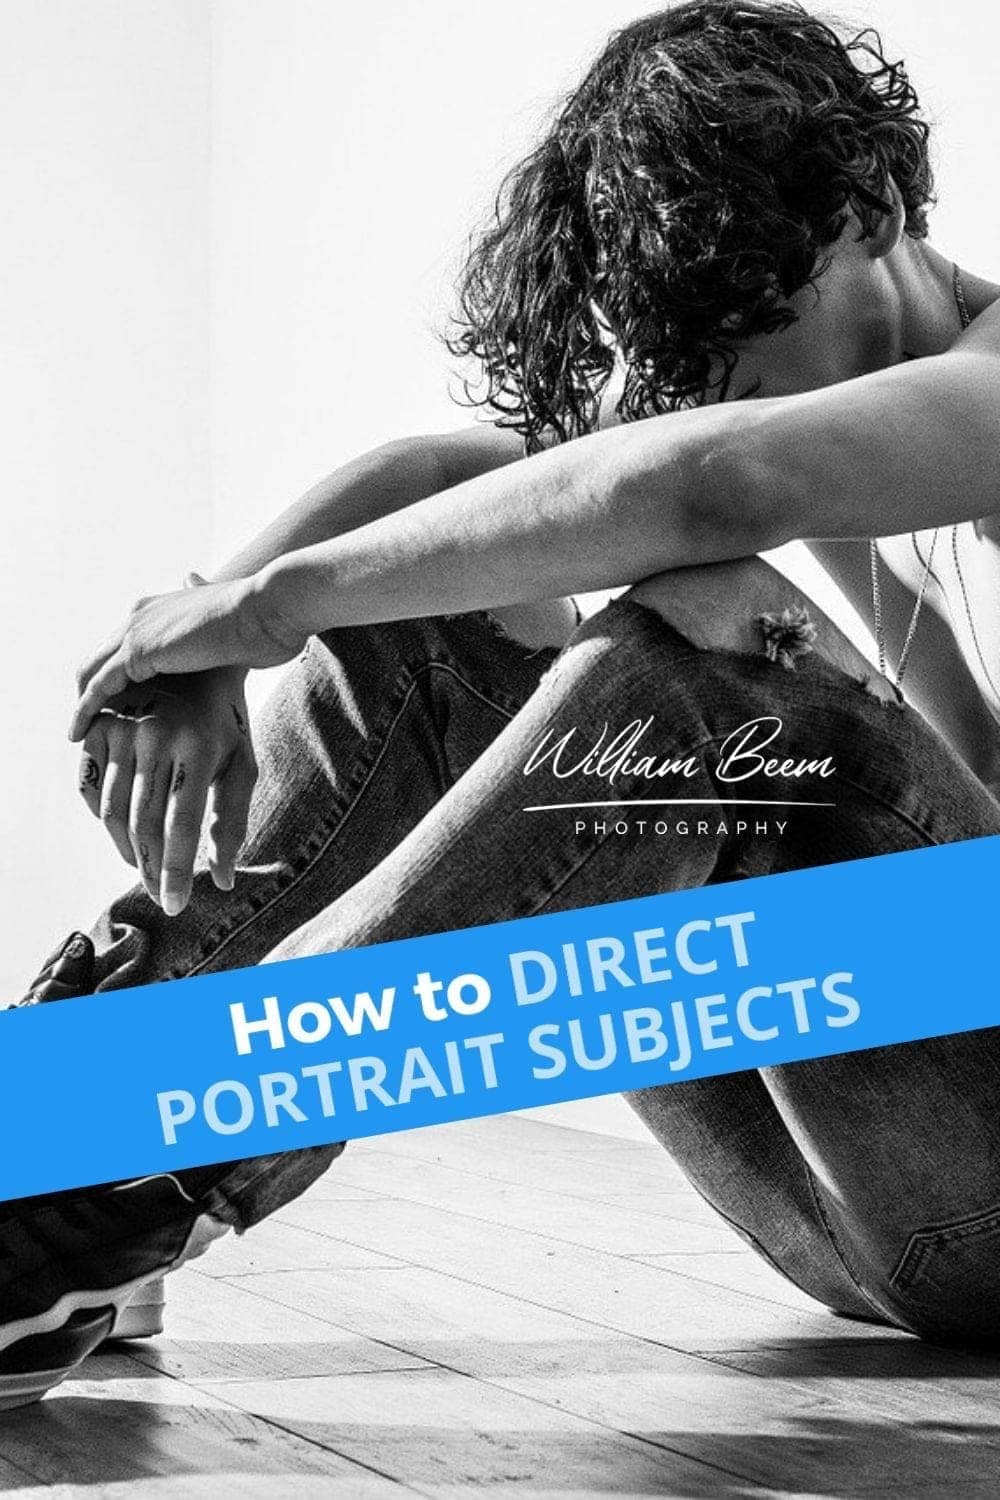 How to Direct Portrait Subjects